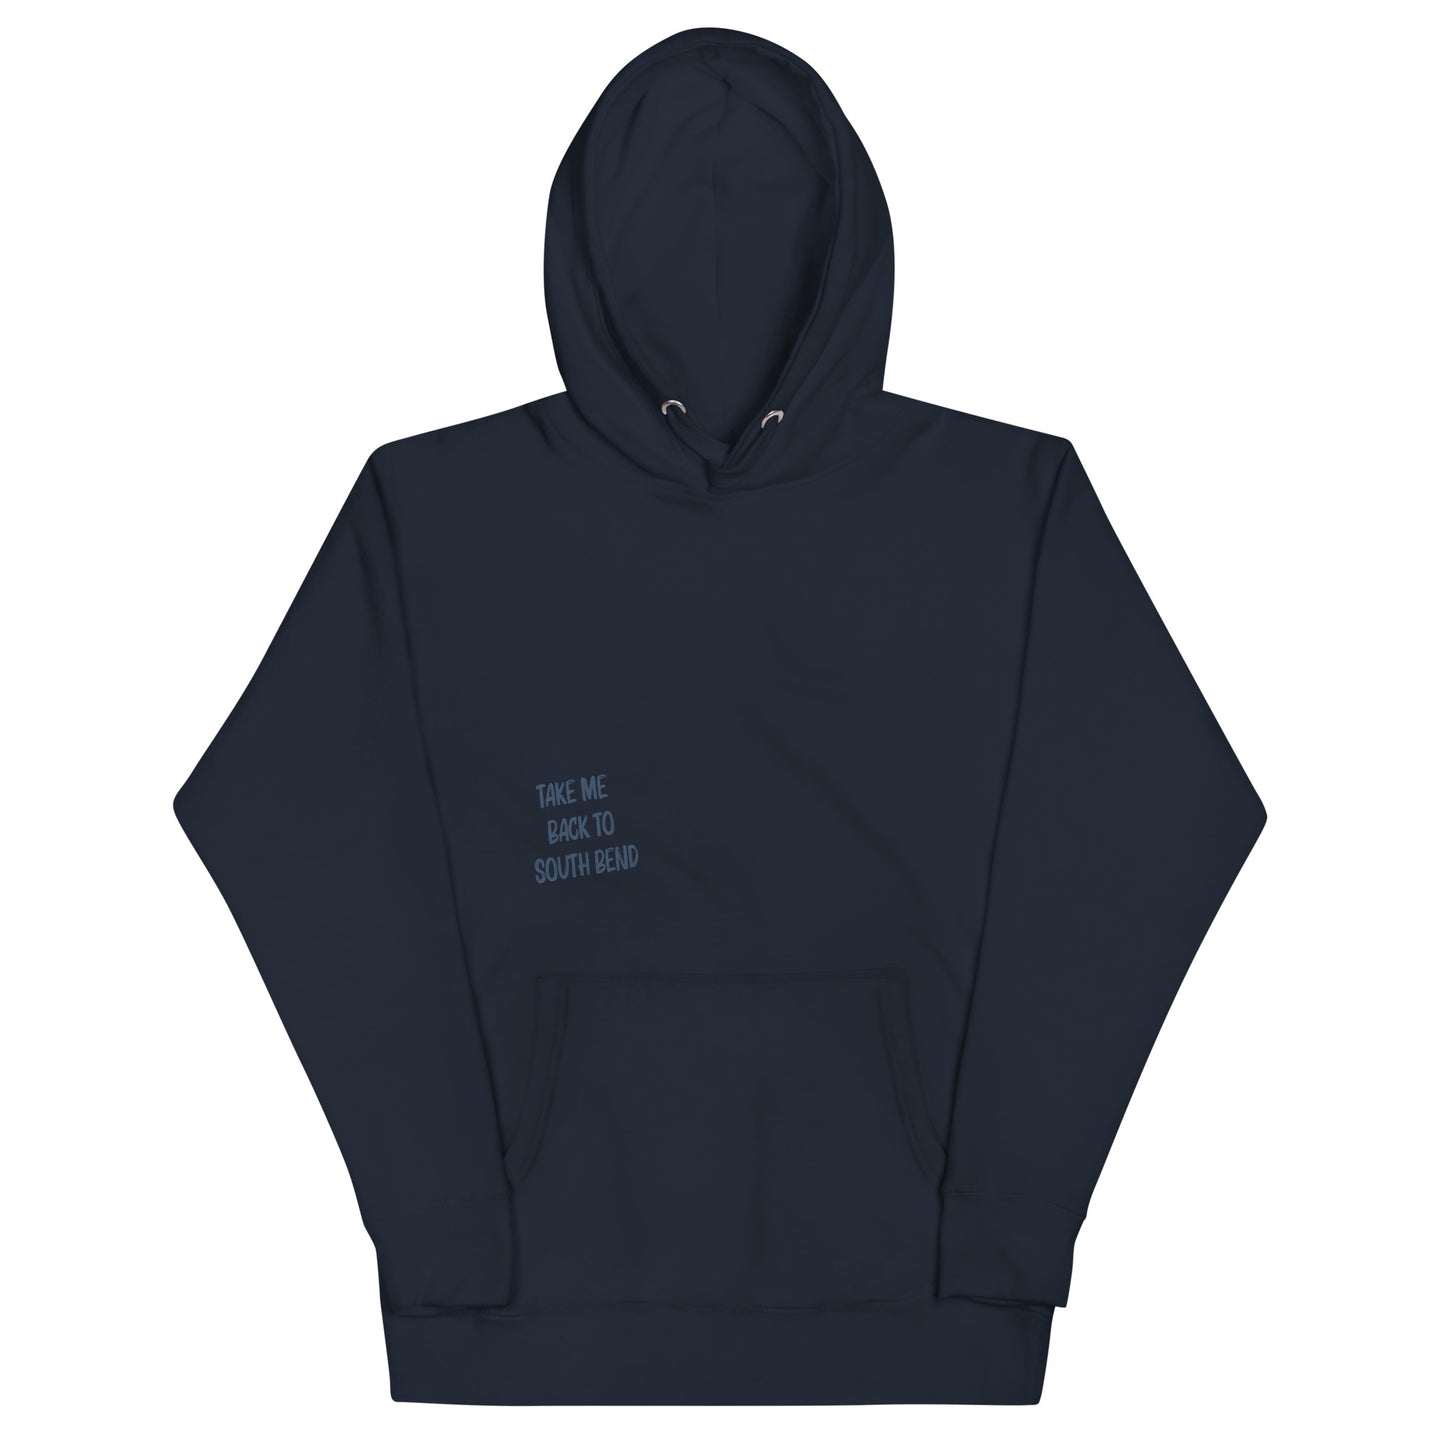 South Bend Guest Check Hoodie